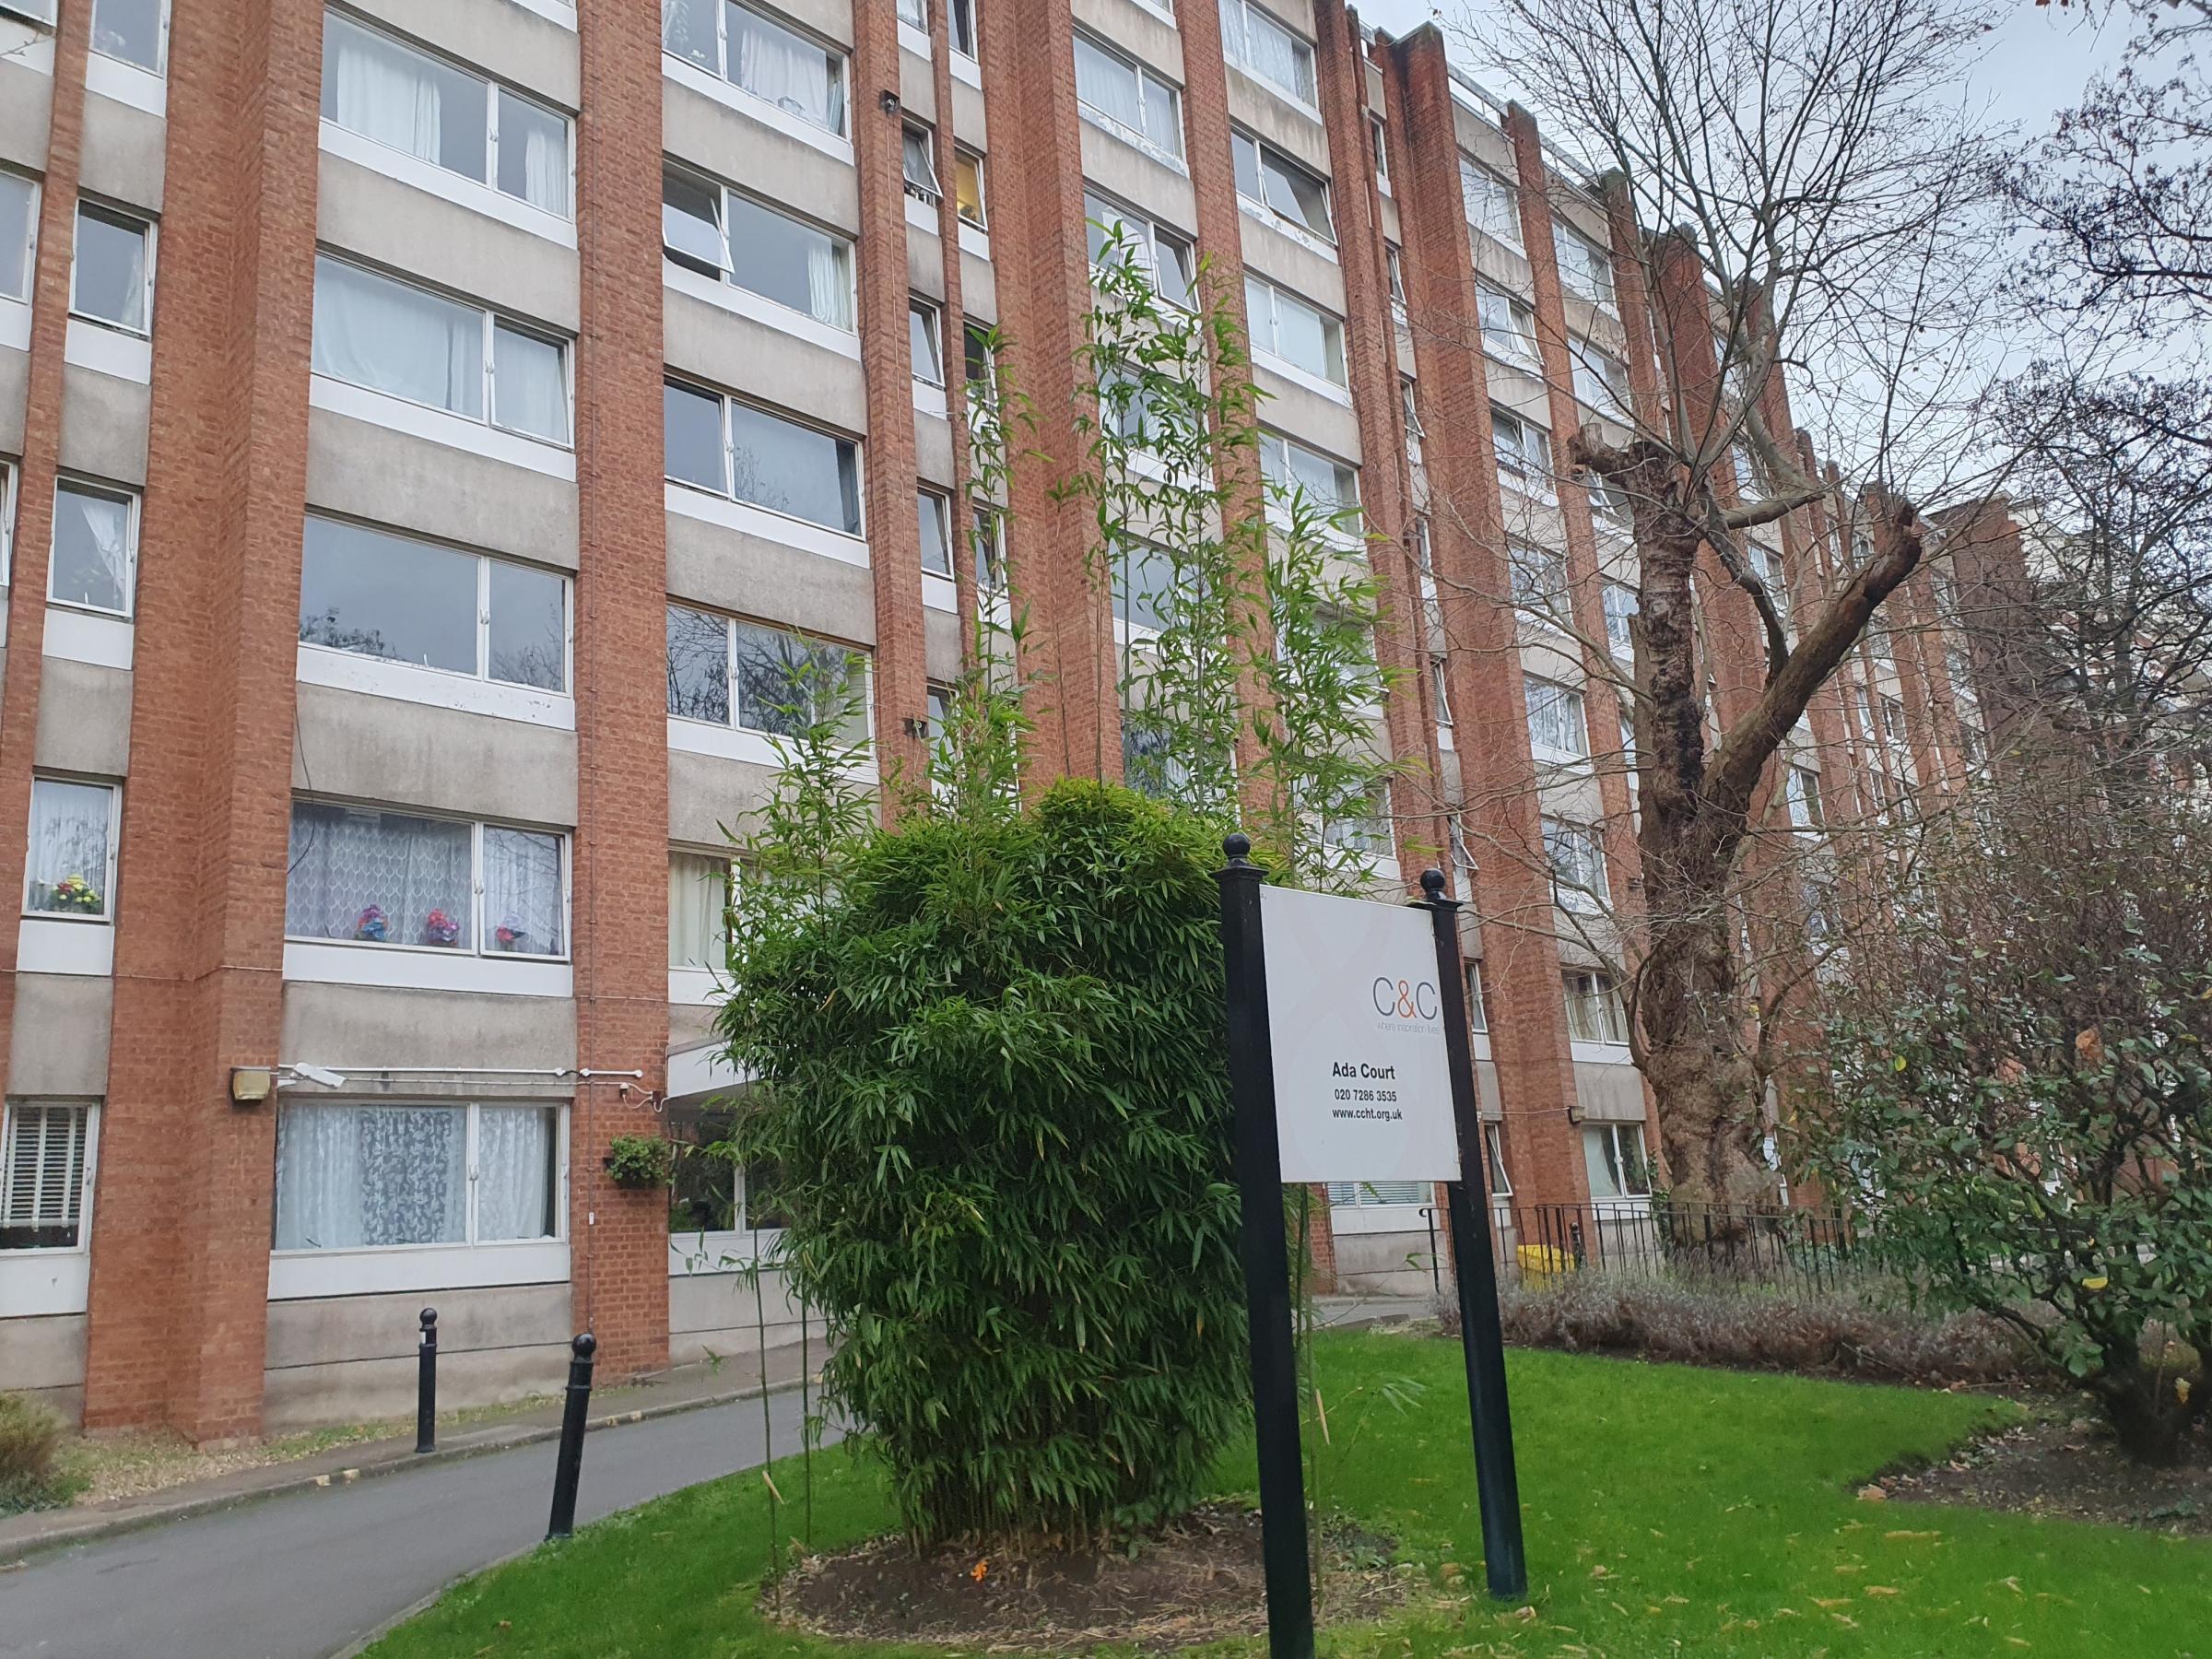 Ada Court is a sheltered accommodation complex in Maida Vale. Permission to use for all LDRS partners. Credit: LDRS.